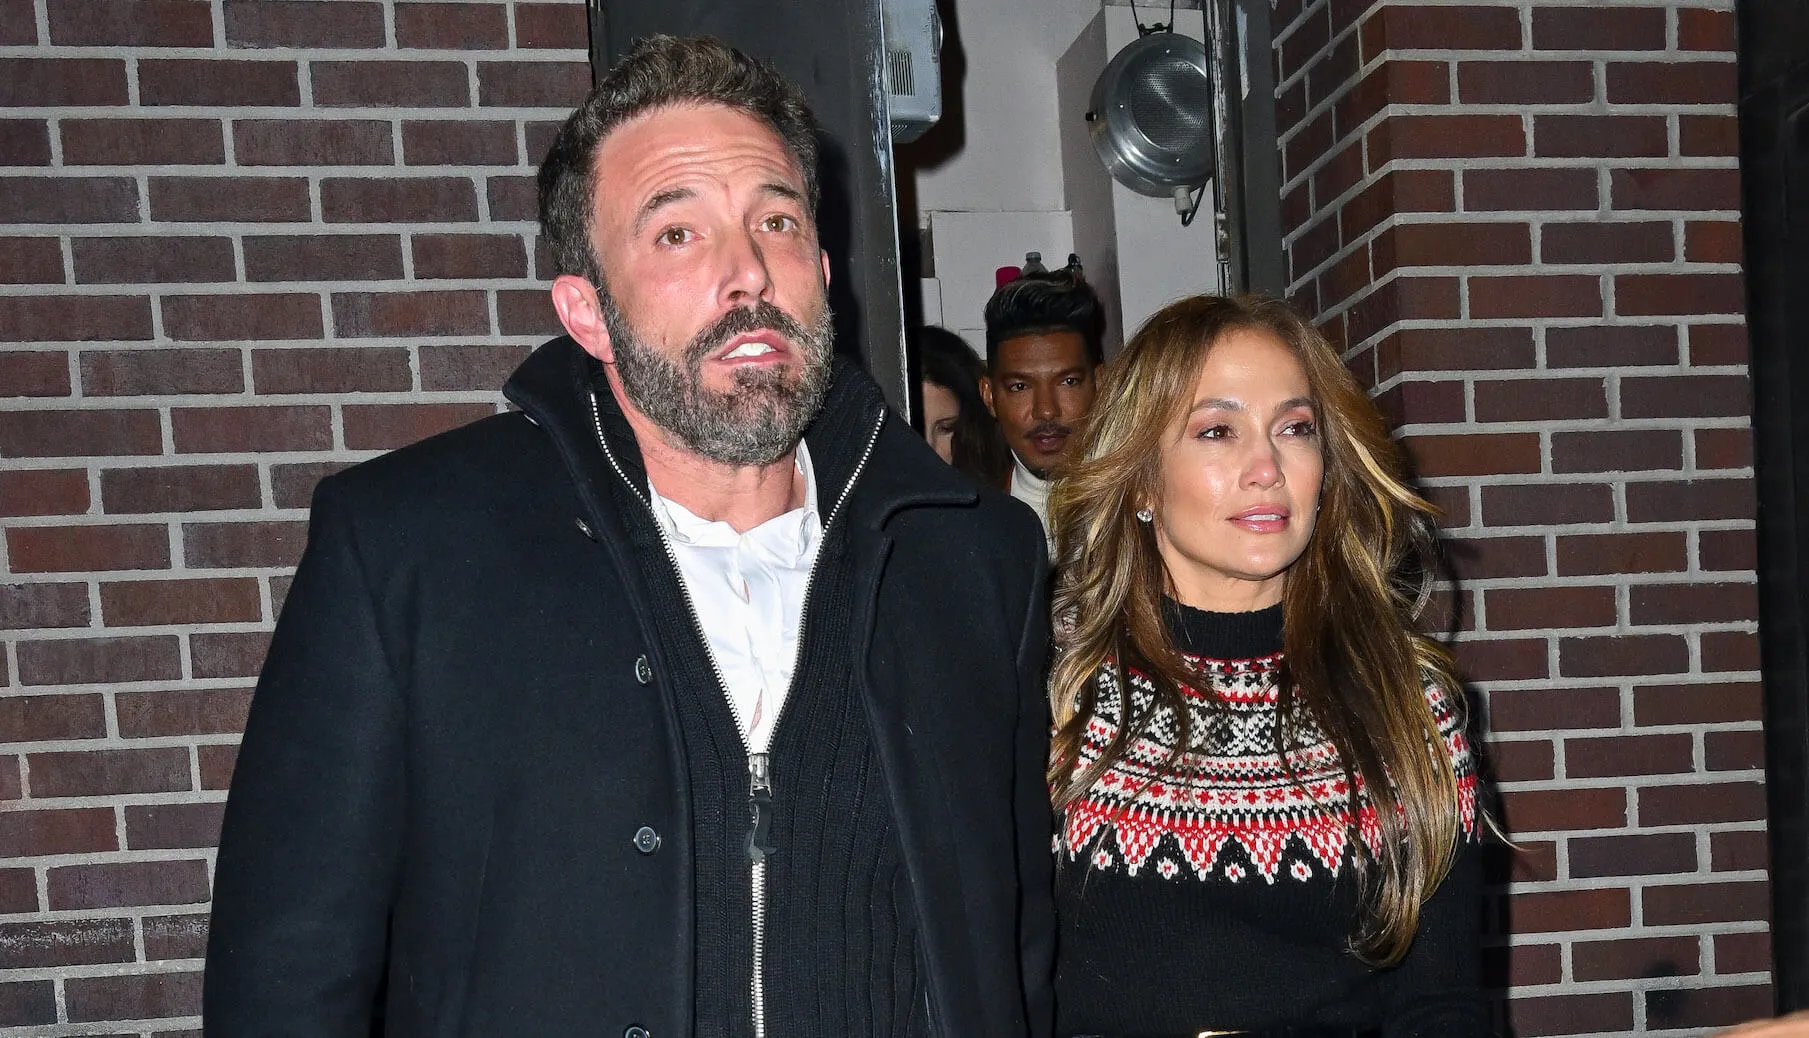 Ben Affleck and Jennifer Lopez leaving an event in New York City in 2022